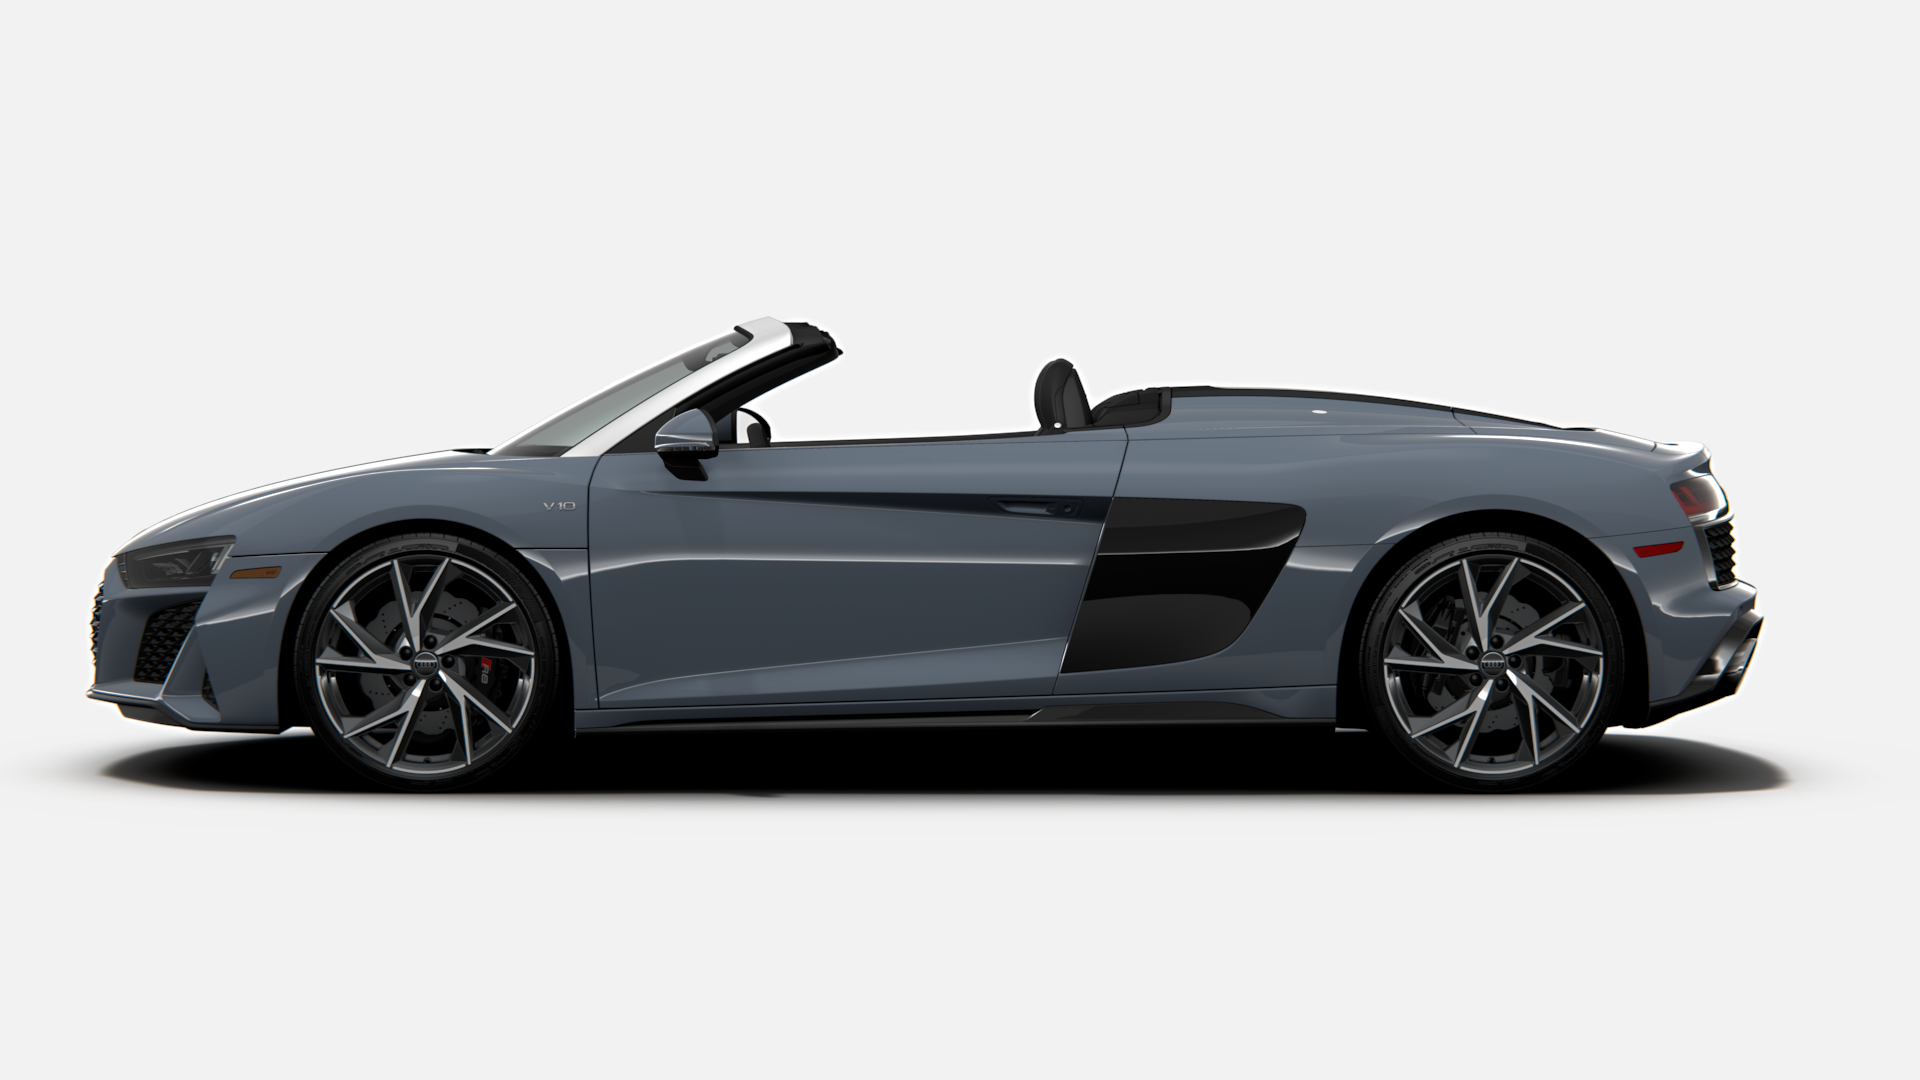 Audi R8 RWD Coupe and Spyder newest members of R8 model line